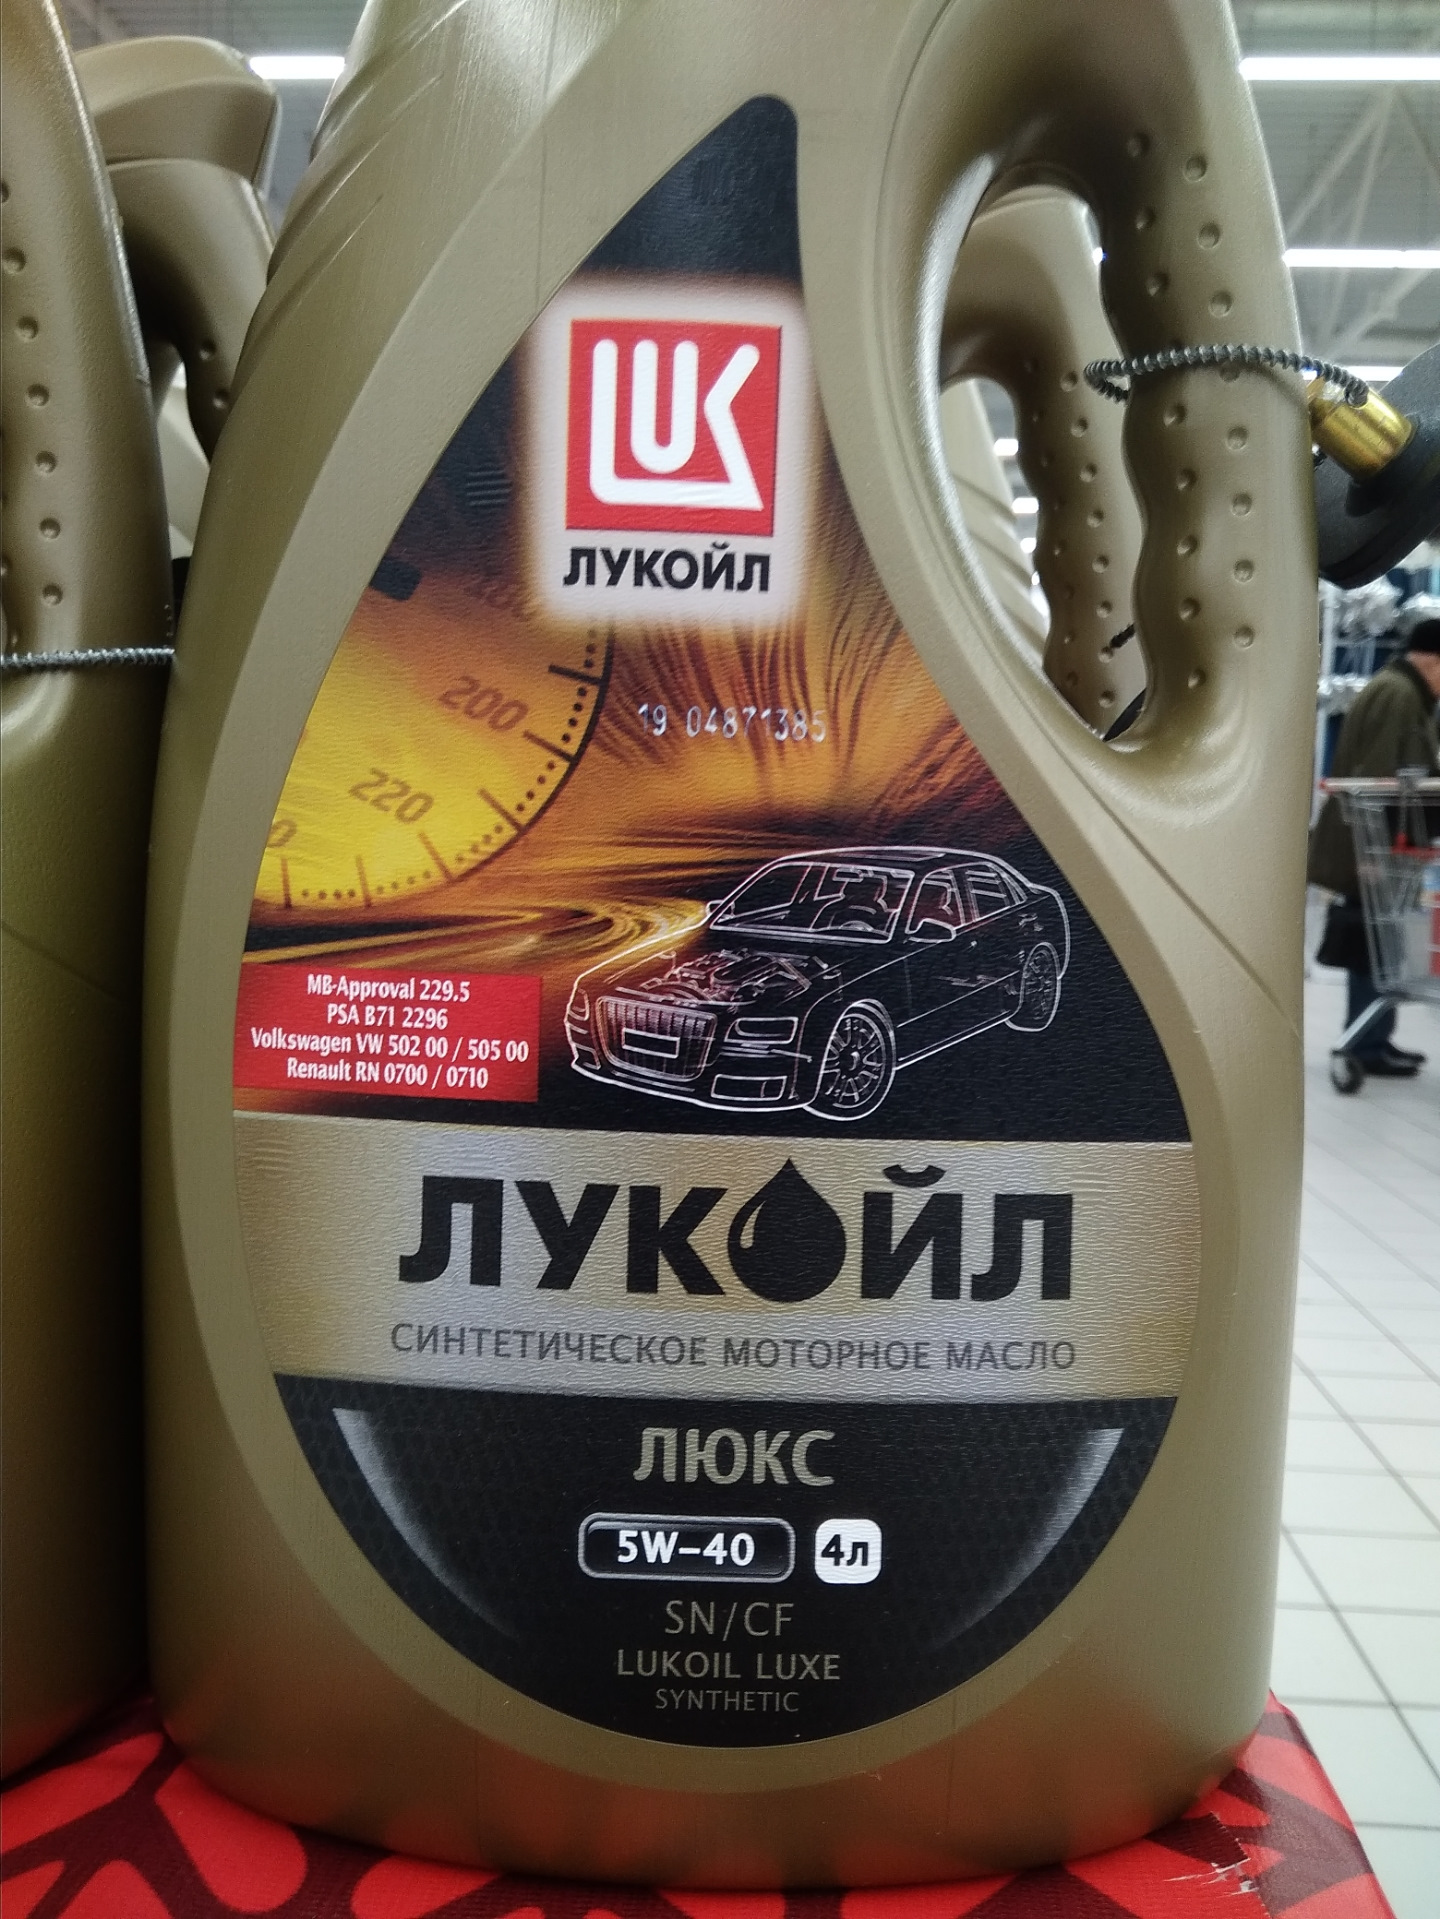 Масло моторное Лукойл Люкс на Рено Дастер 2.0. Рено Логан 1 1.6 Lukoil Luxe. Масло Renault rn0700. Рено дастер какое моторное масло